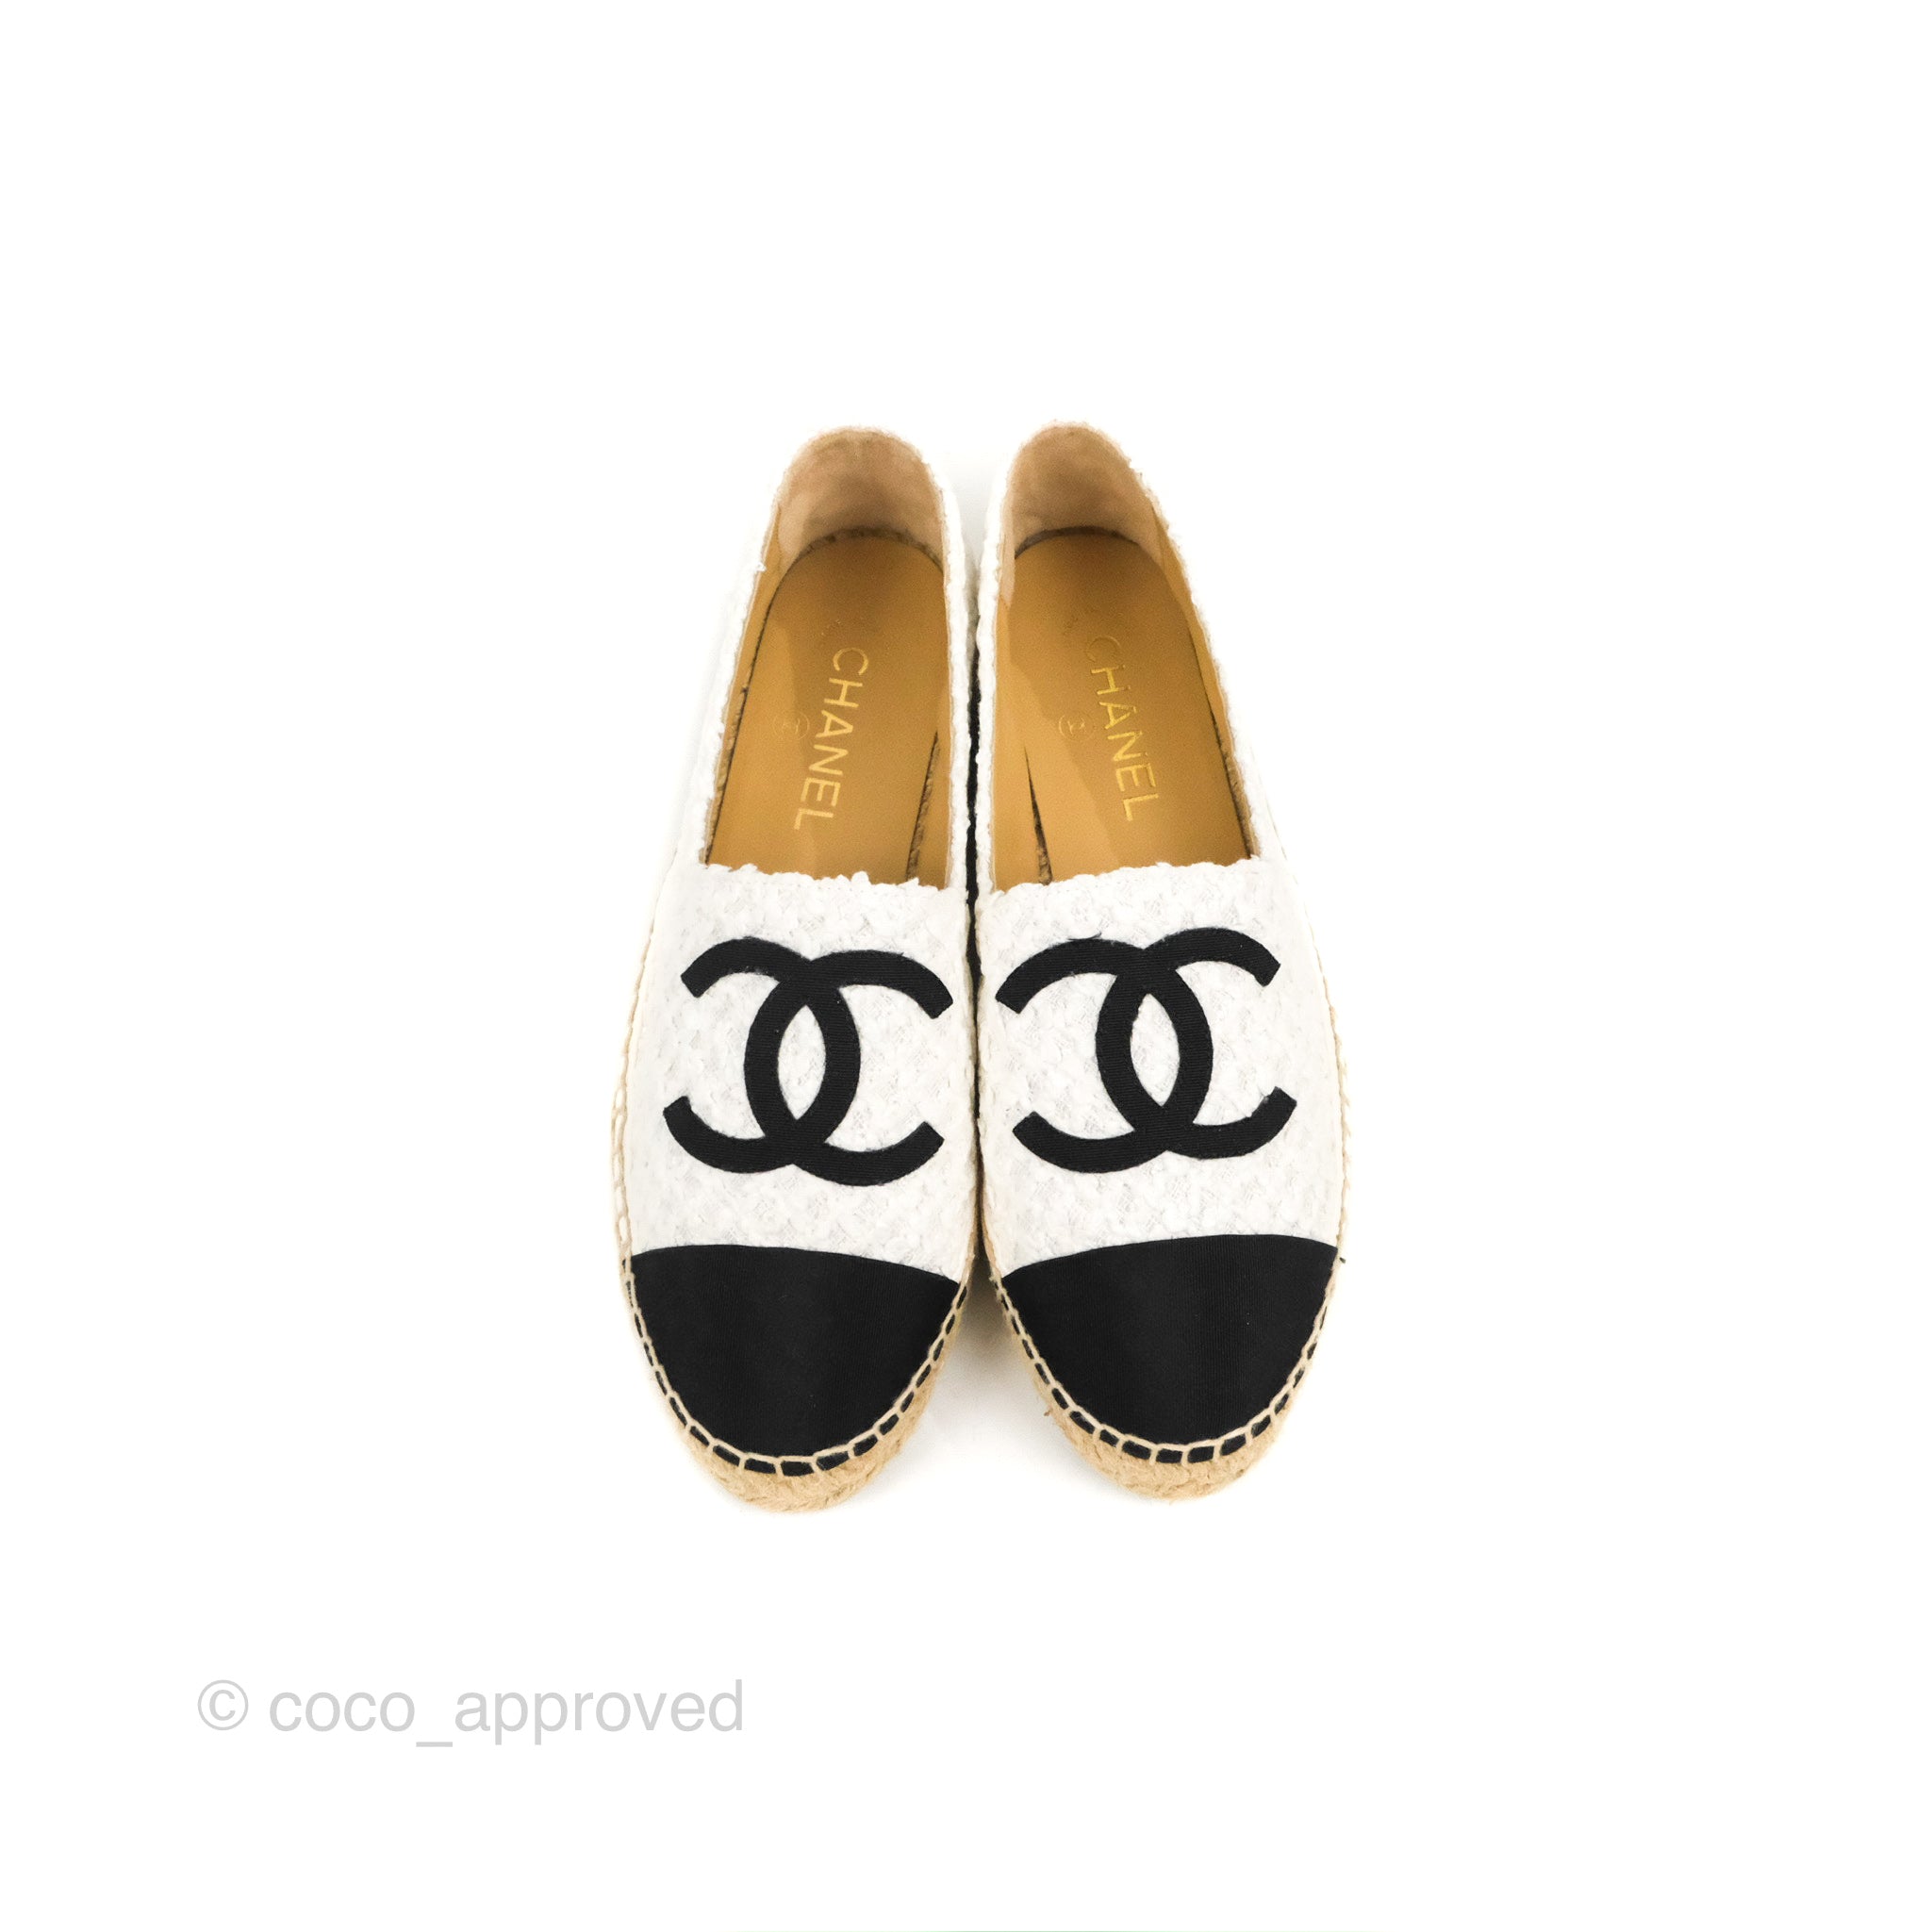 Chanel Espadrille Black White Tweed Size 39 – Coco Approved Studio